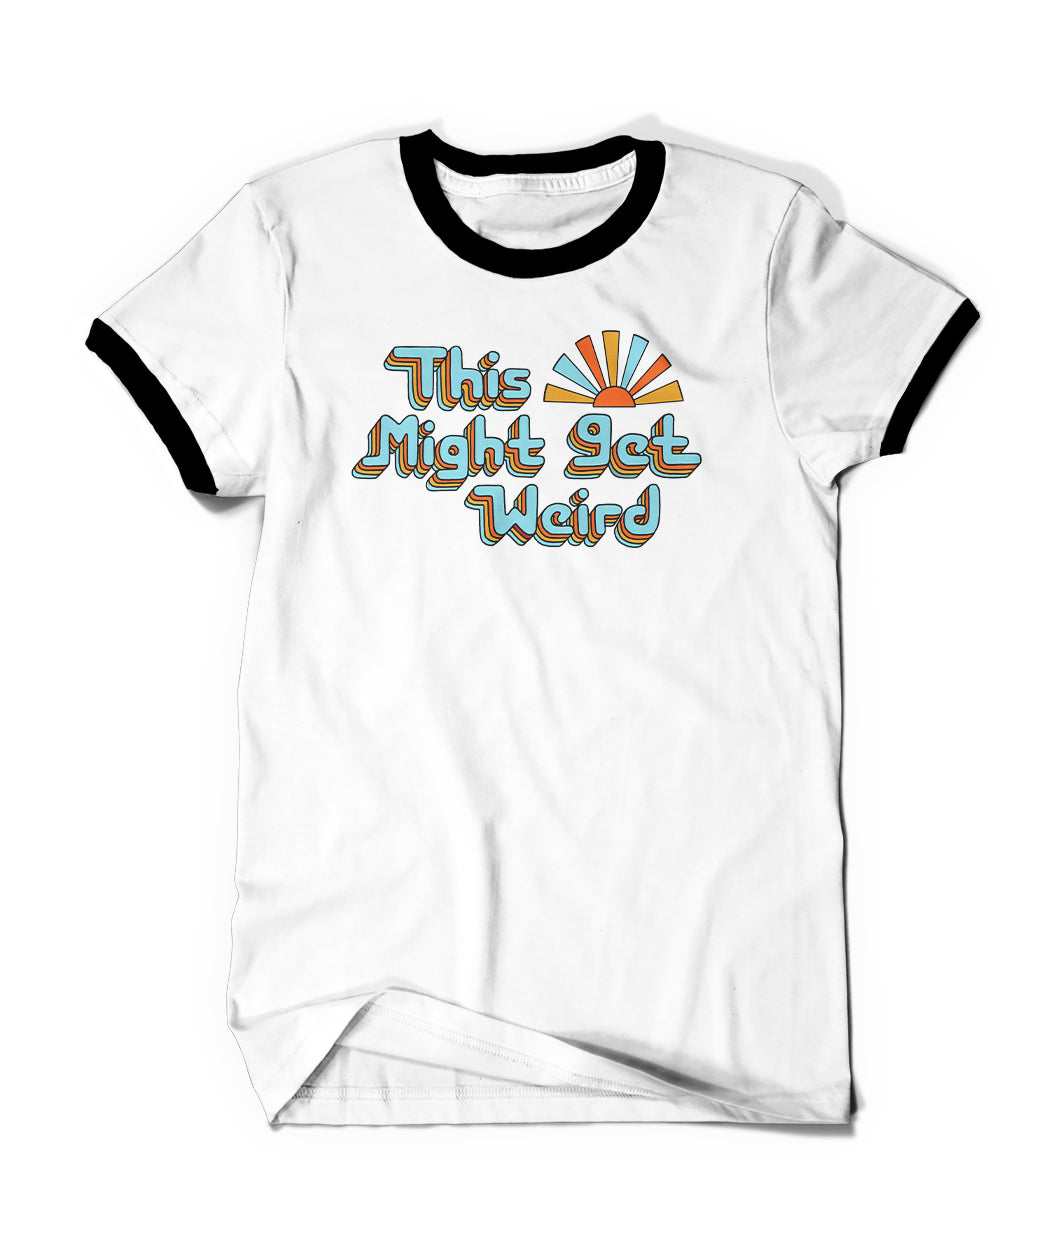 A white short sleeve shirt. The arm and neck holes have black collars. The text “This Might Get Weird” is displayed large across the chest in light blue with multicolored outlines. Next to “This” is a stylized sun with the same colorful rays.